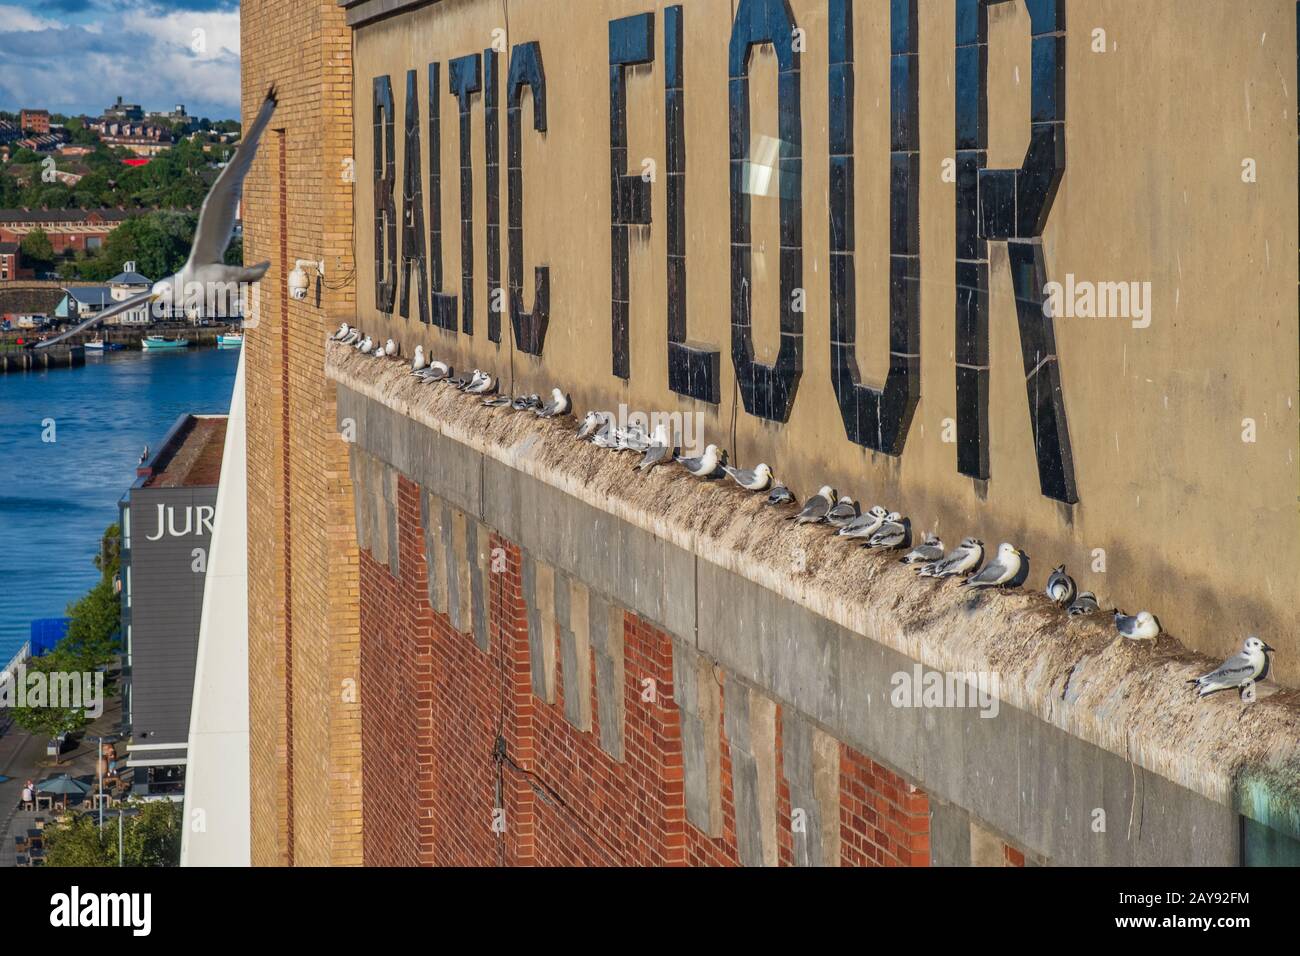 Seagulls and their chicks nested on the wall of the Baltic Centre of Contemporary Art in Newcastle, UK Stock Photo